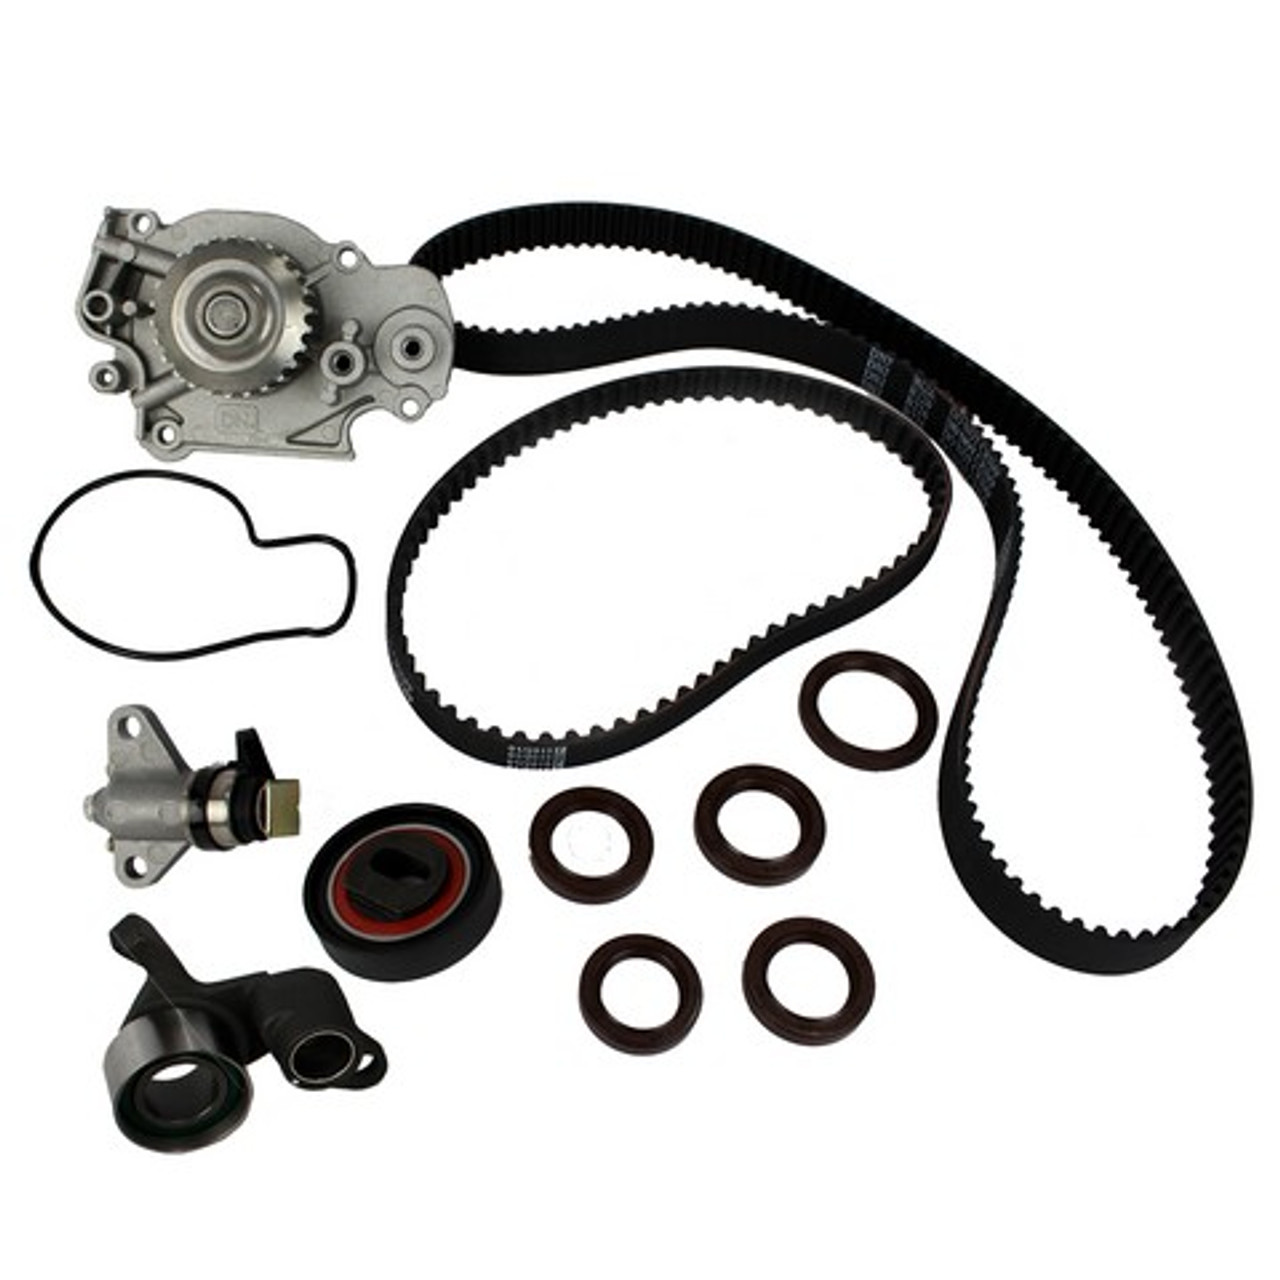 Timing Belt Kit with Water Pump 2.2L 1996 Honda Prelude - TBK223WP.4